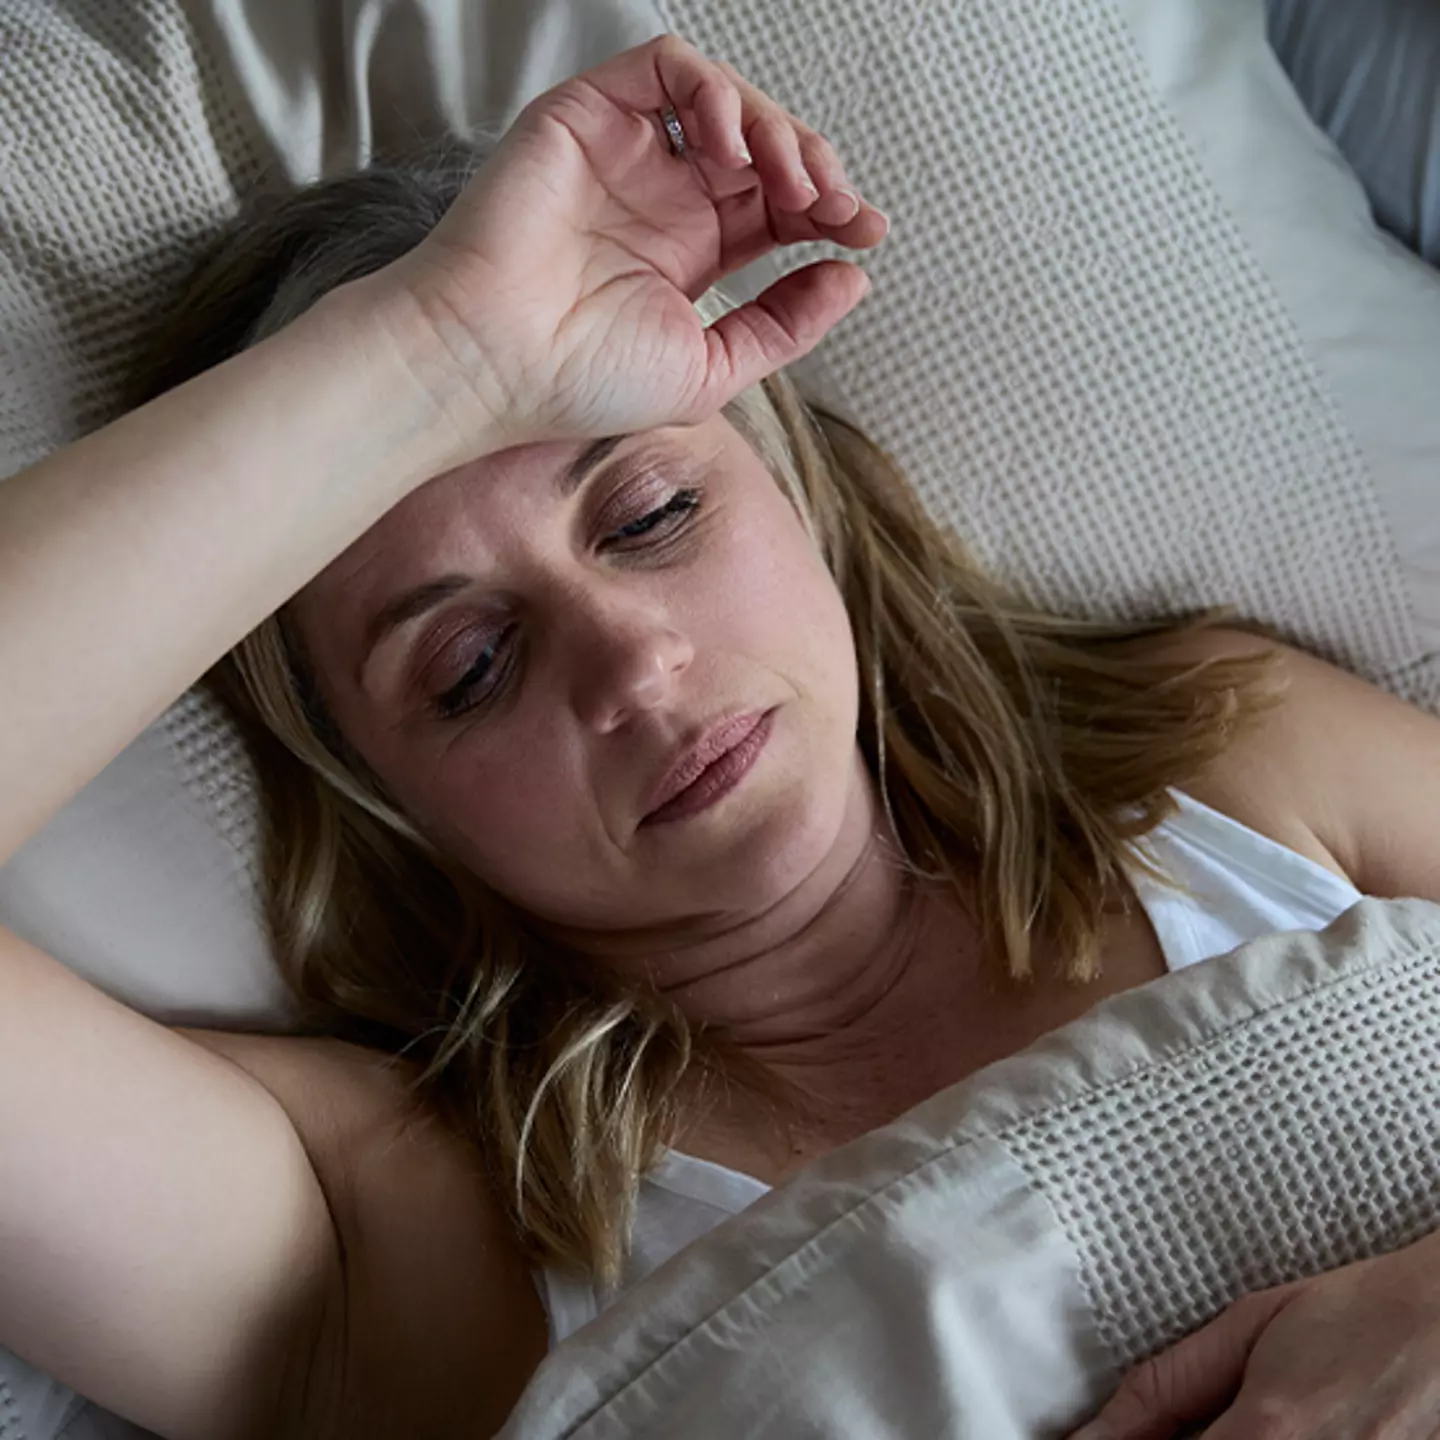 Scientists have calculated the absolute worst hour of the day